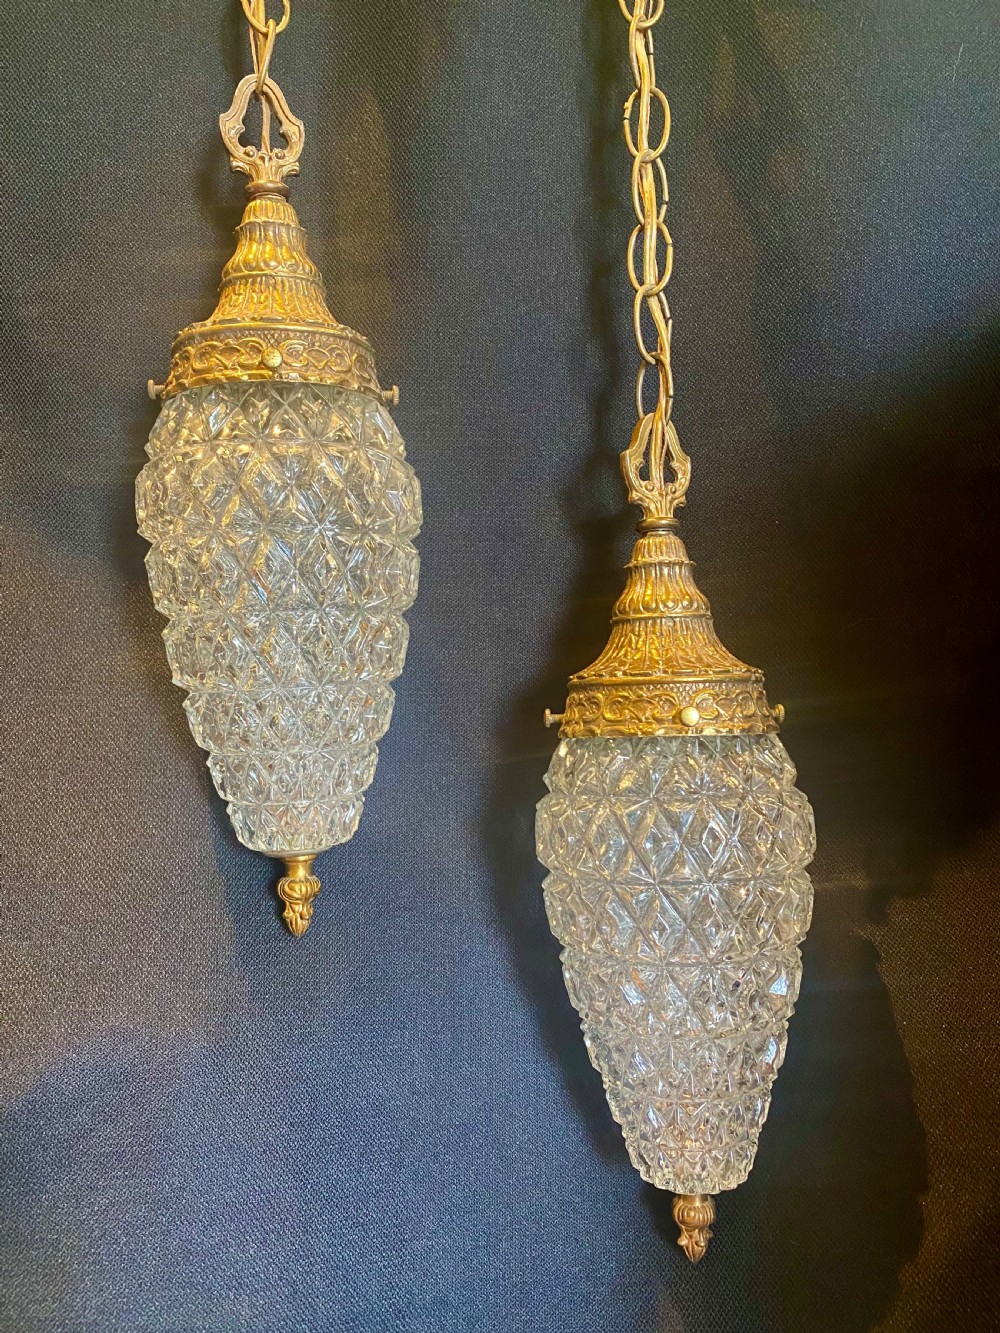 a pair of antique glass french hall lanterns